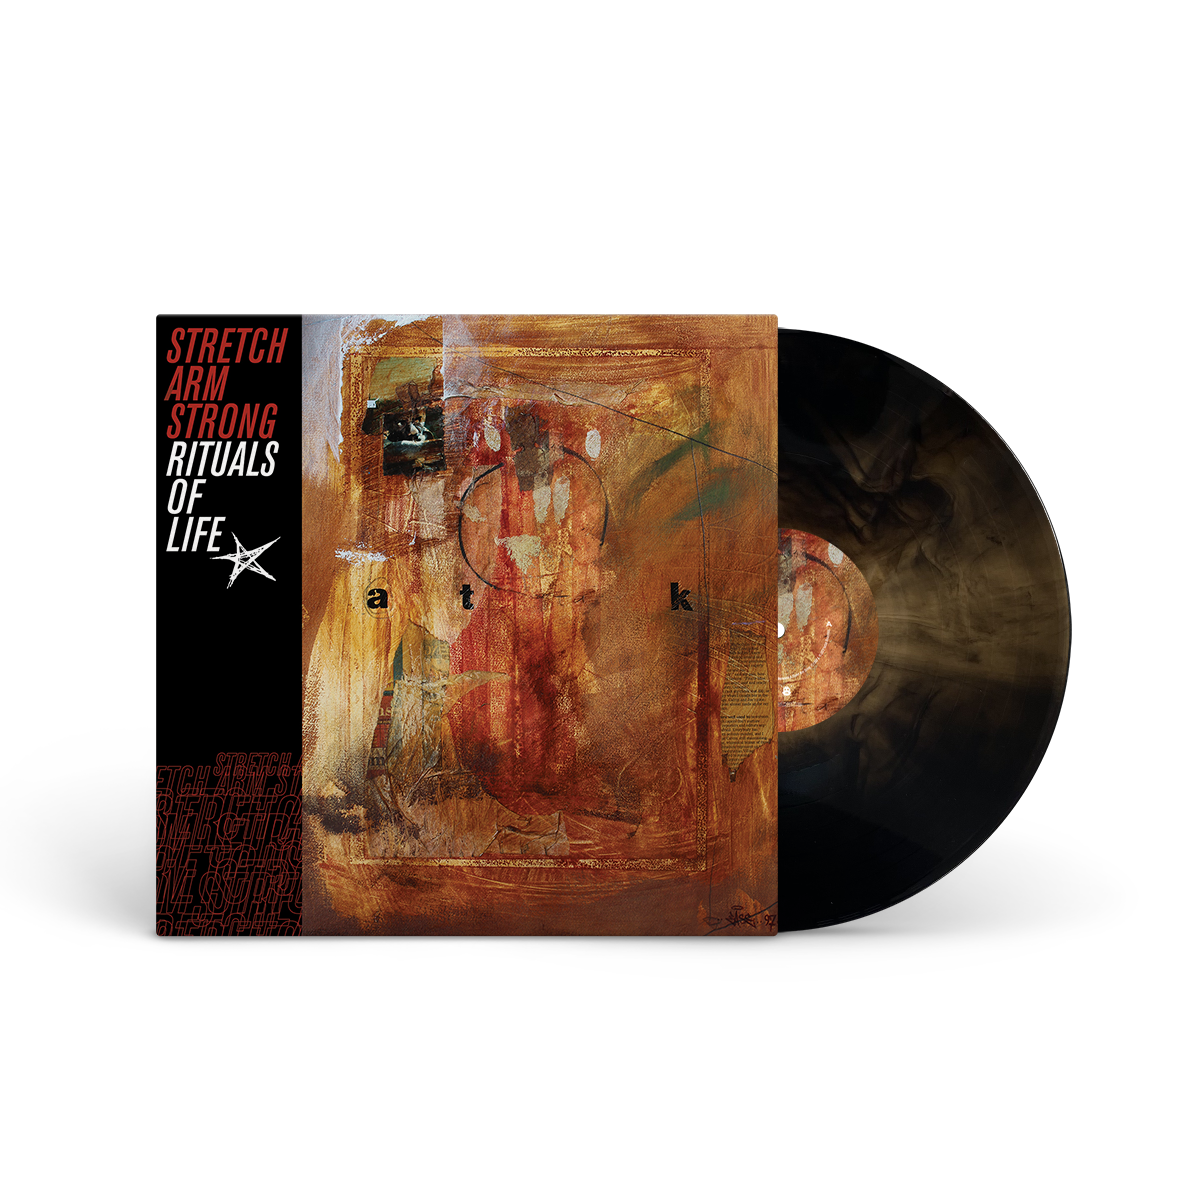 STRETCH ARM STRONG "Rituals Of Life" LP